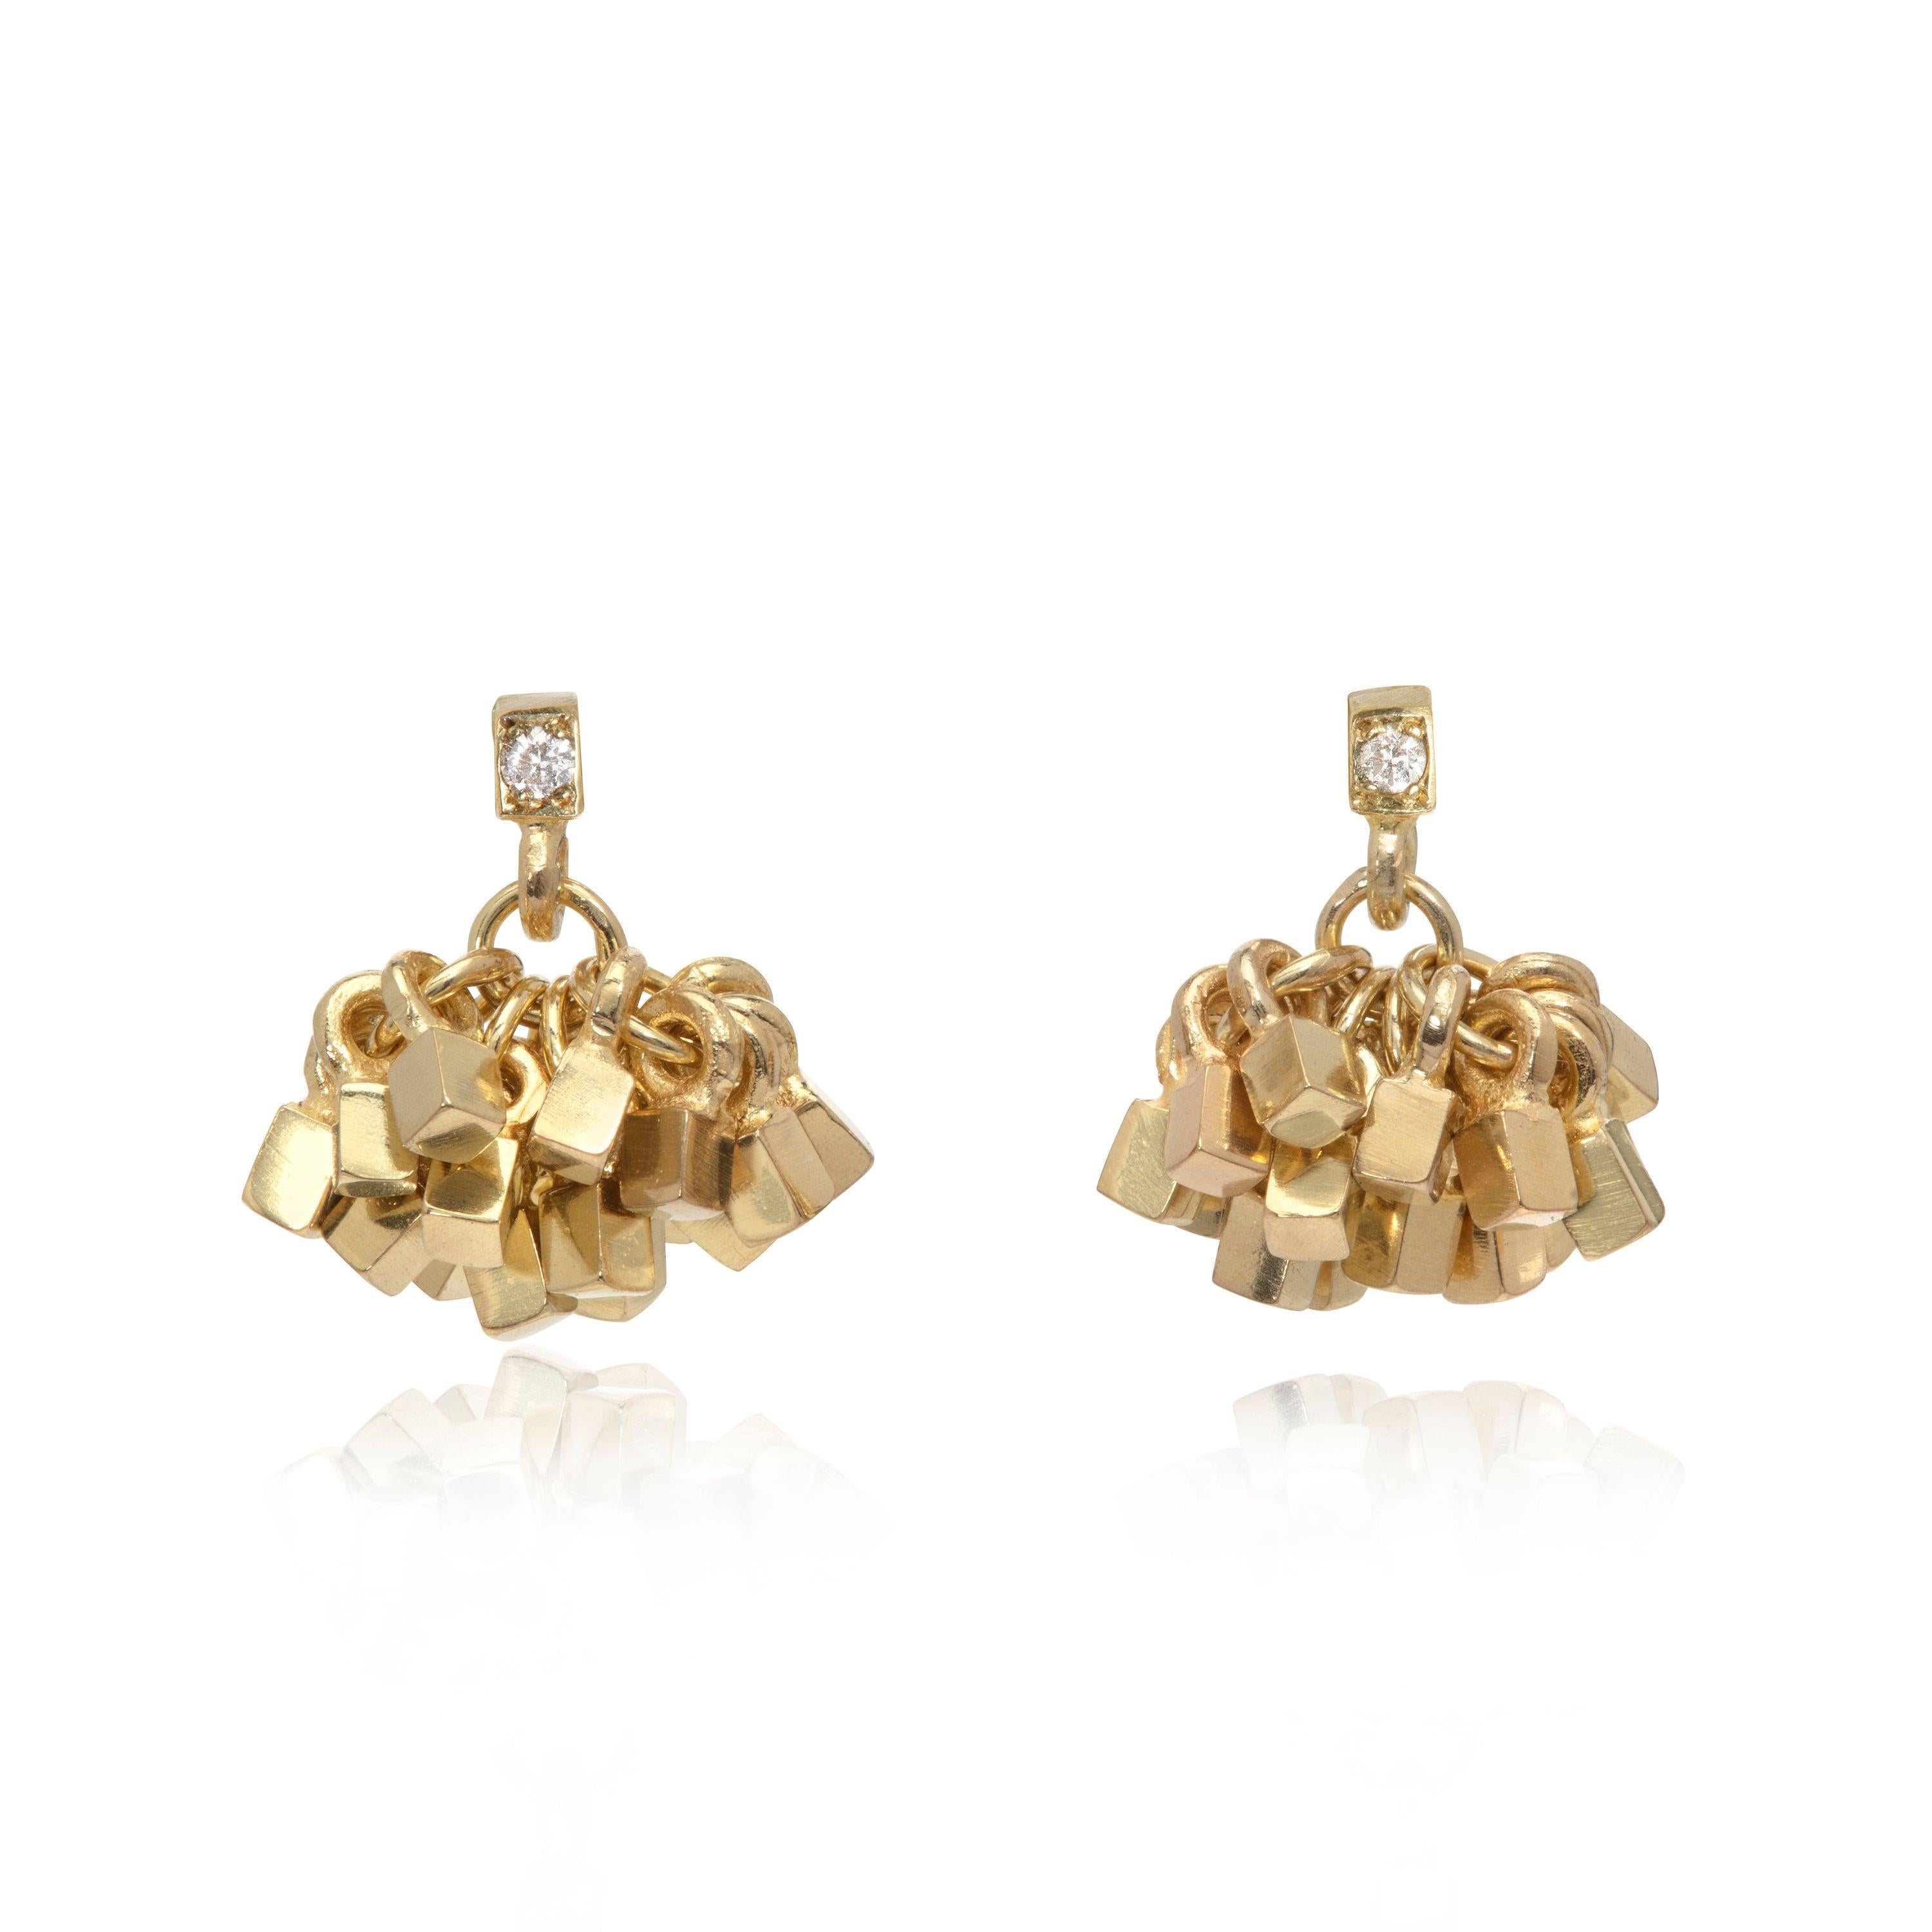 These elegant, striking earrings in 18K gold are designed and made by UK jeweler Sarah Pulvertaft. Beneath the diamond accented square top is a 